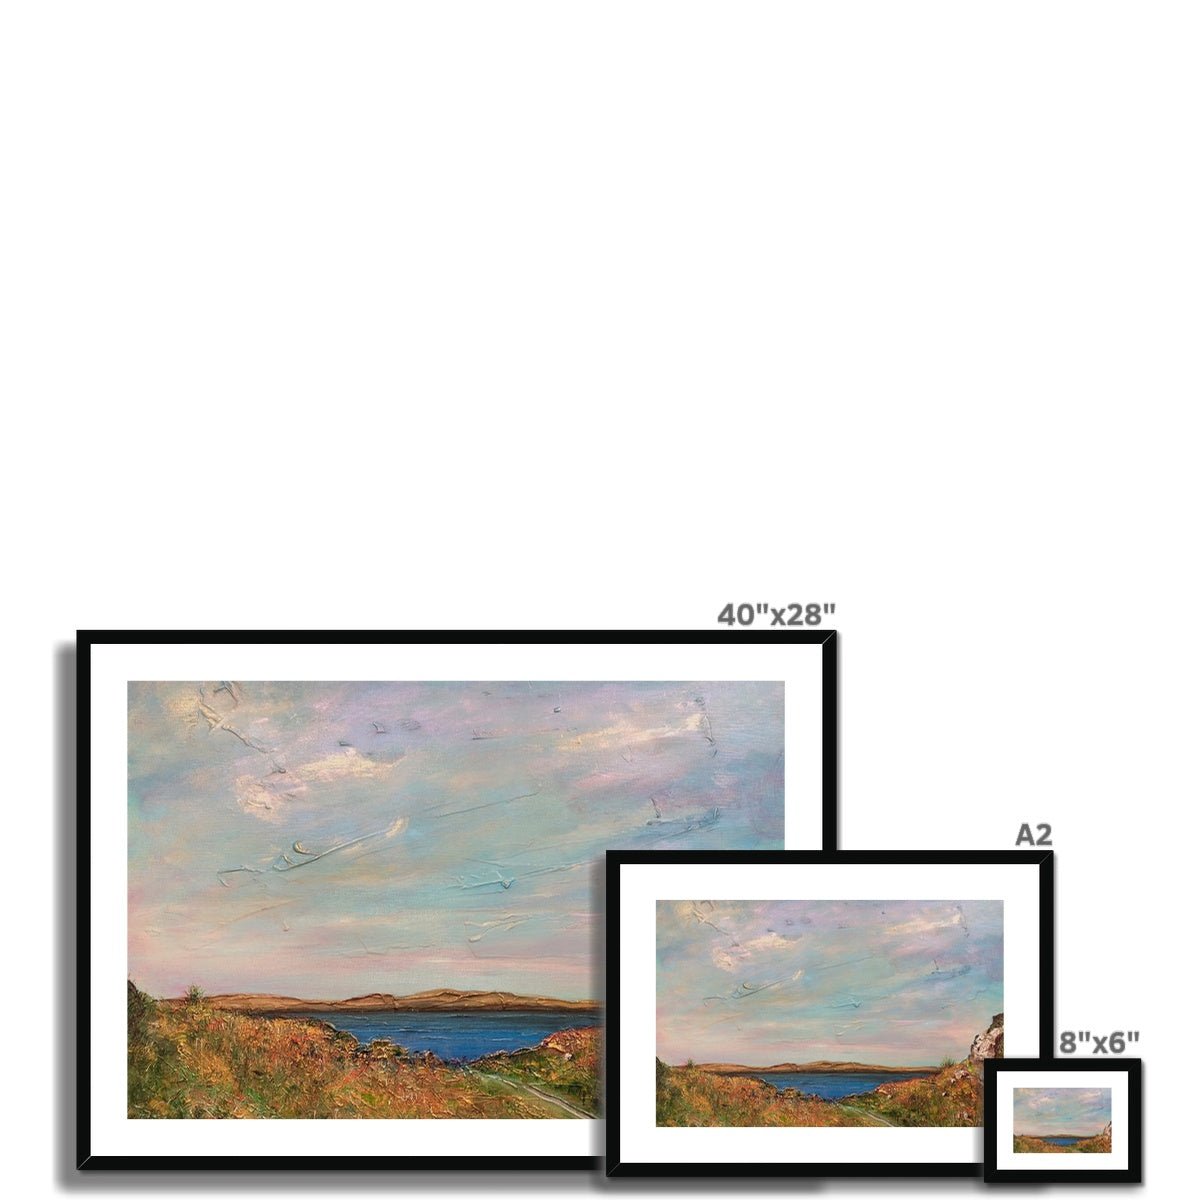 Jura From Crinan Painting | Framed & Mounted Prints From Scotland-Framed & Mounted Prints-Hebridean Islands Art Gallery-Paintings, Prints, Homeware, Art Gifts From Scotland By Scottish Artist Kevin Hunter